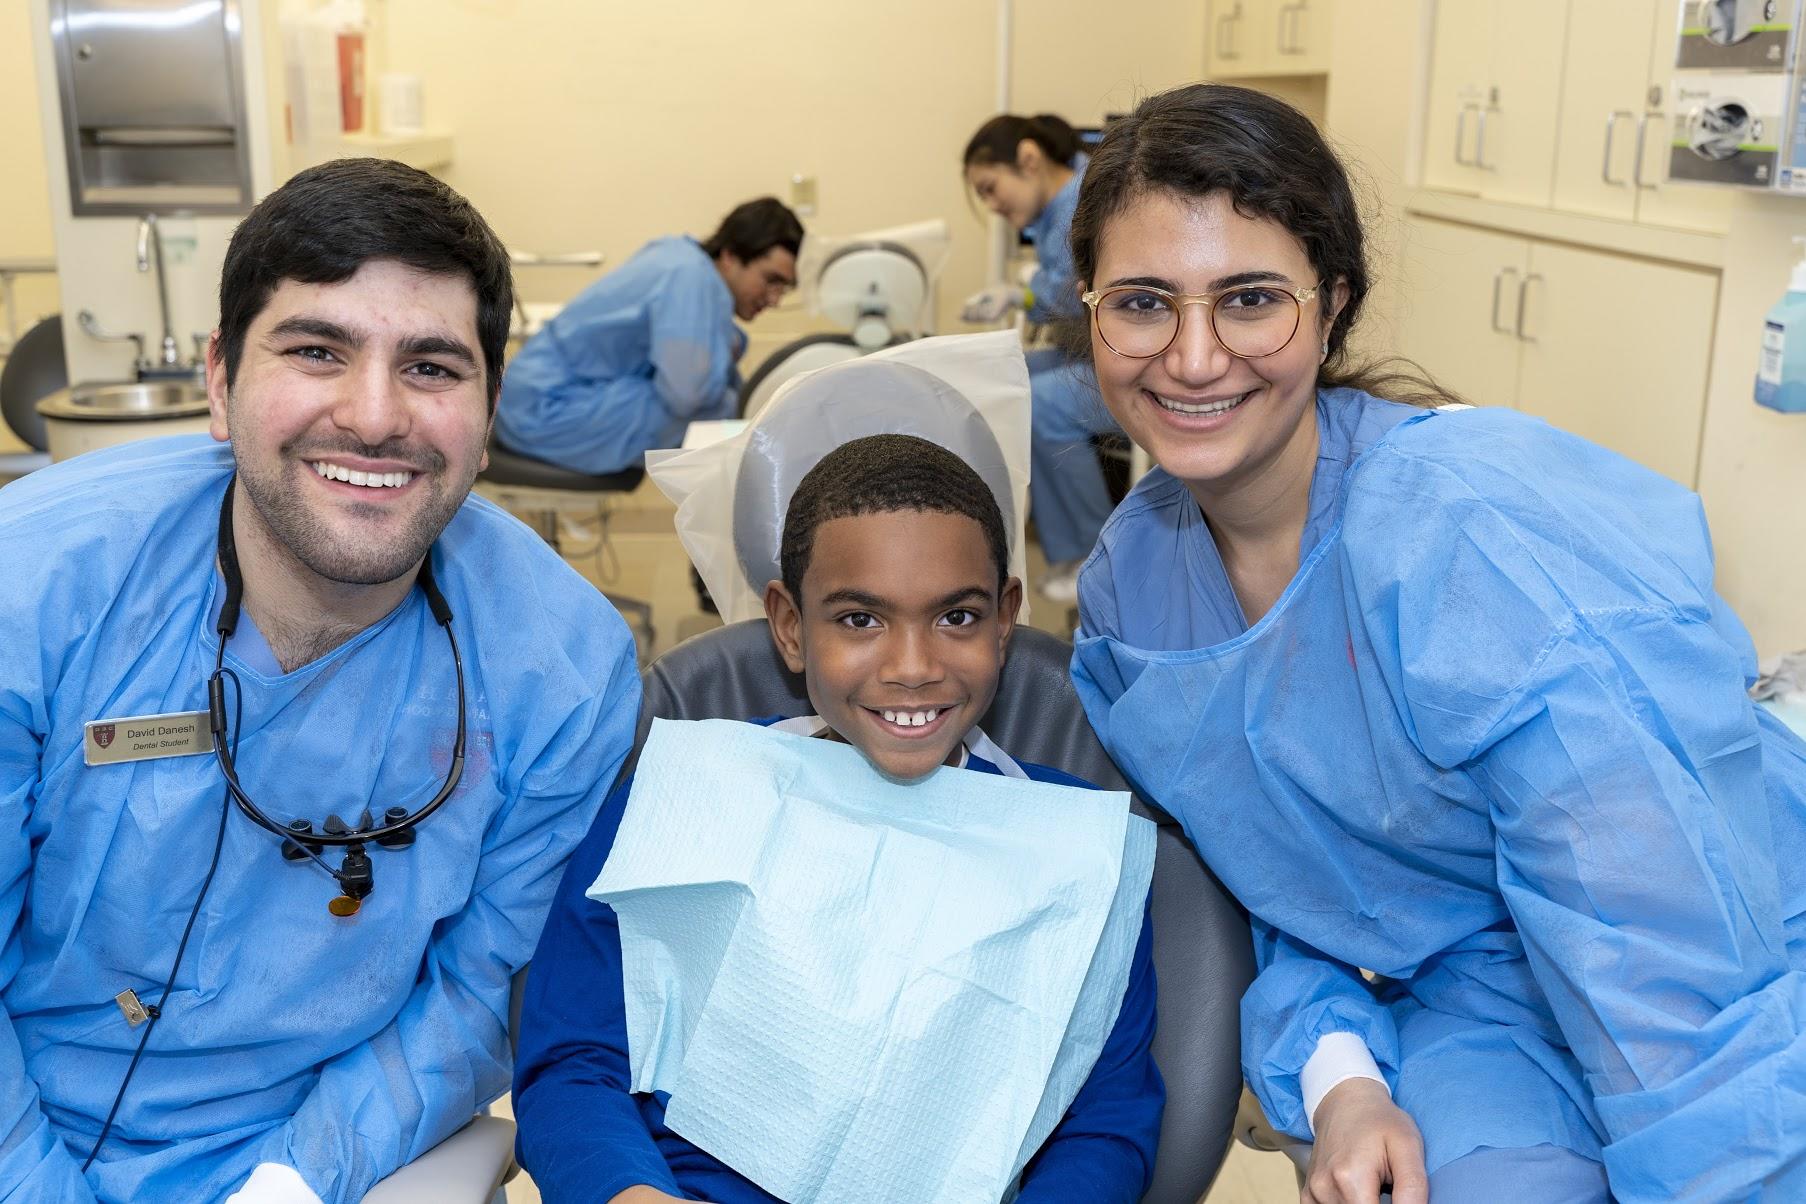 David Danesh, DMD20, provides care with his classmates at the annual Give Kids a Smile event.